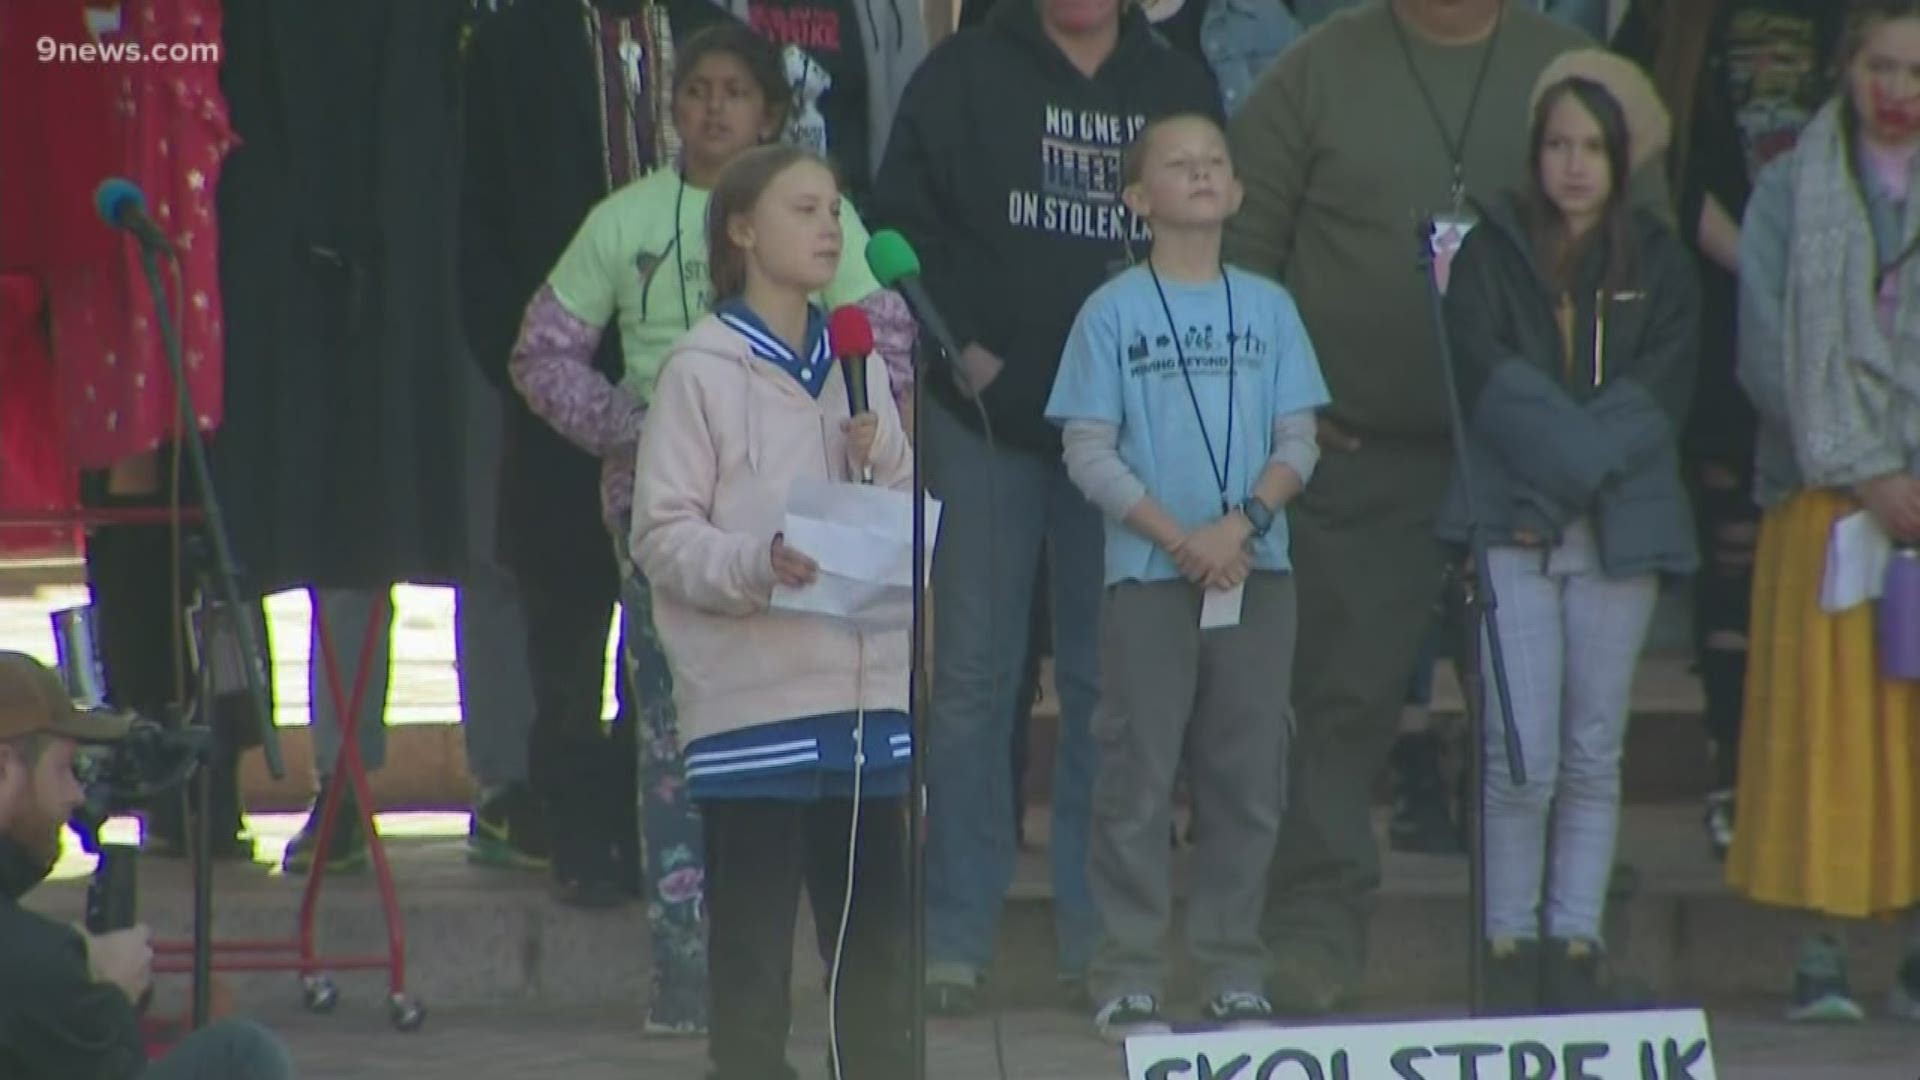 Thousands gathered to hear environmental activist Greta Thunberg speak at the Fridays For Future climate strike in Denver Friday.